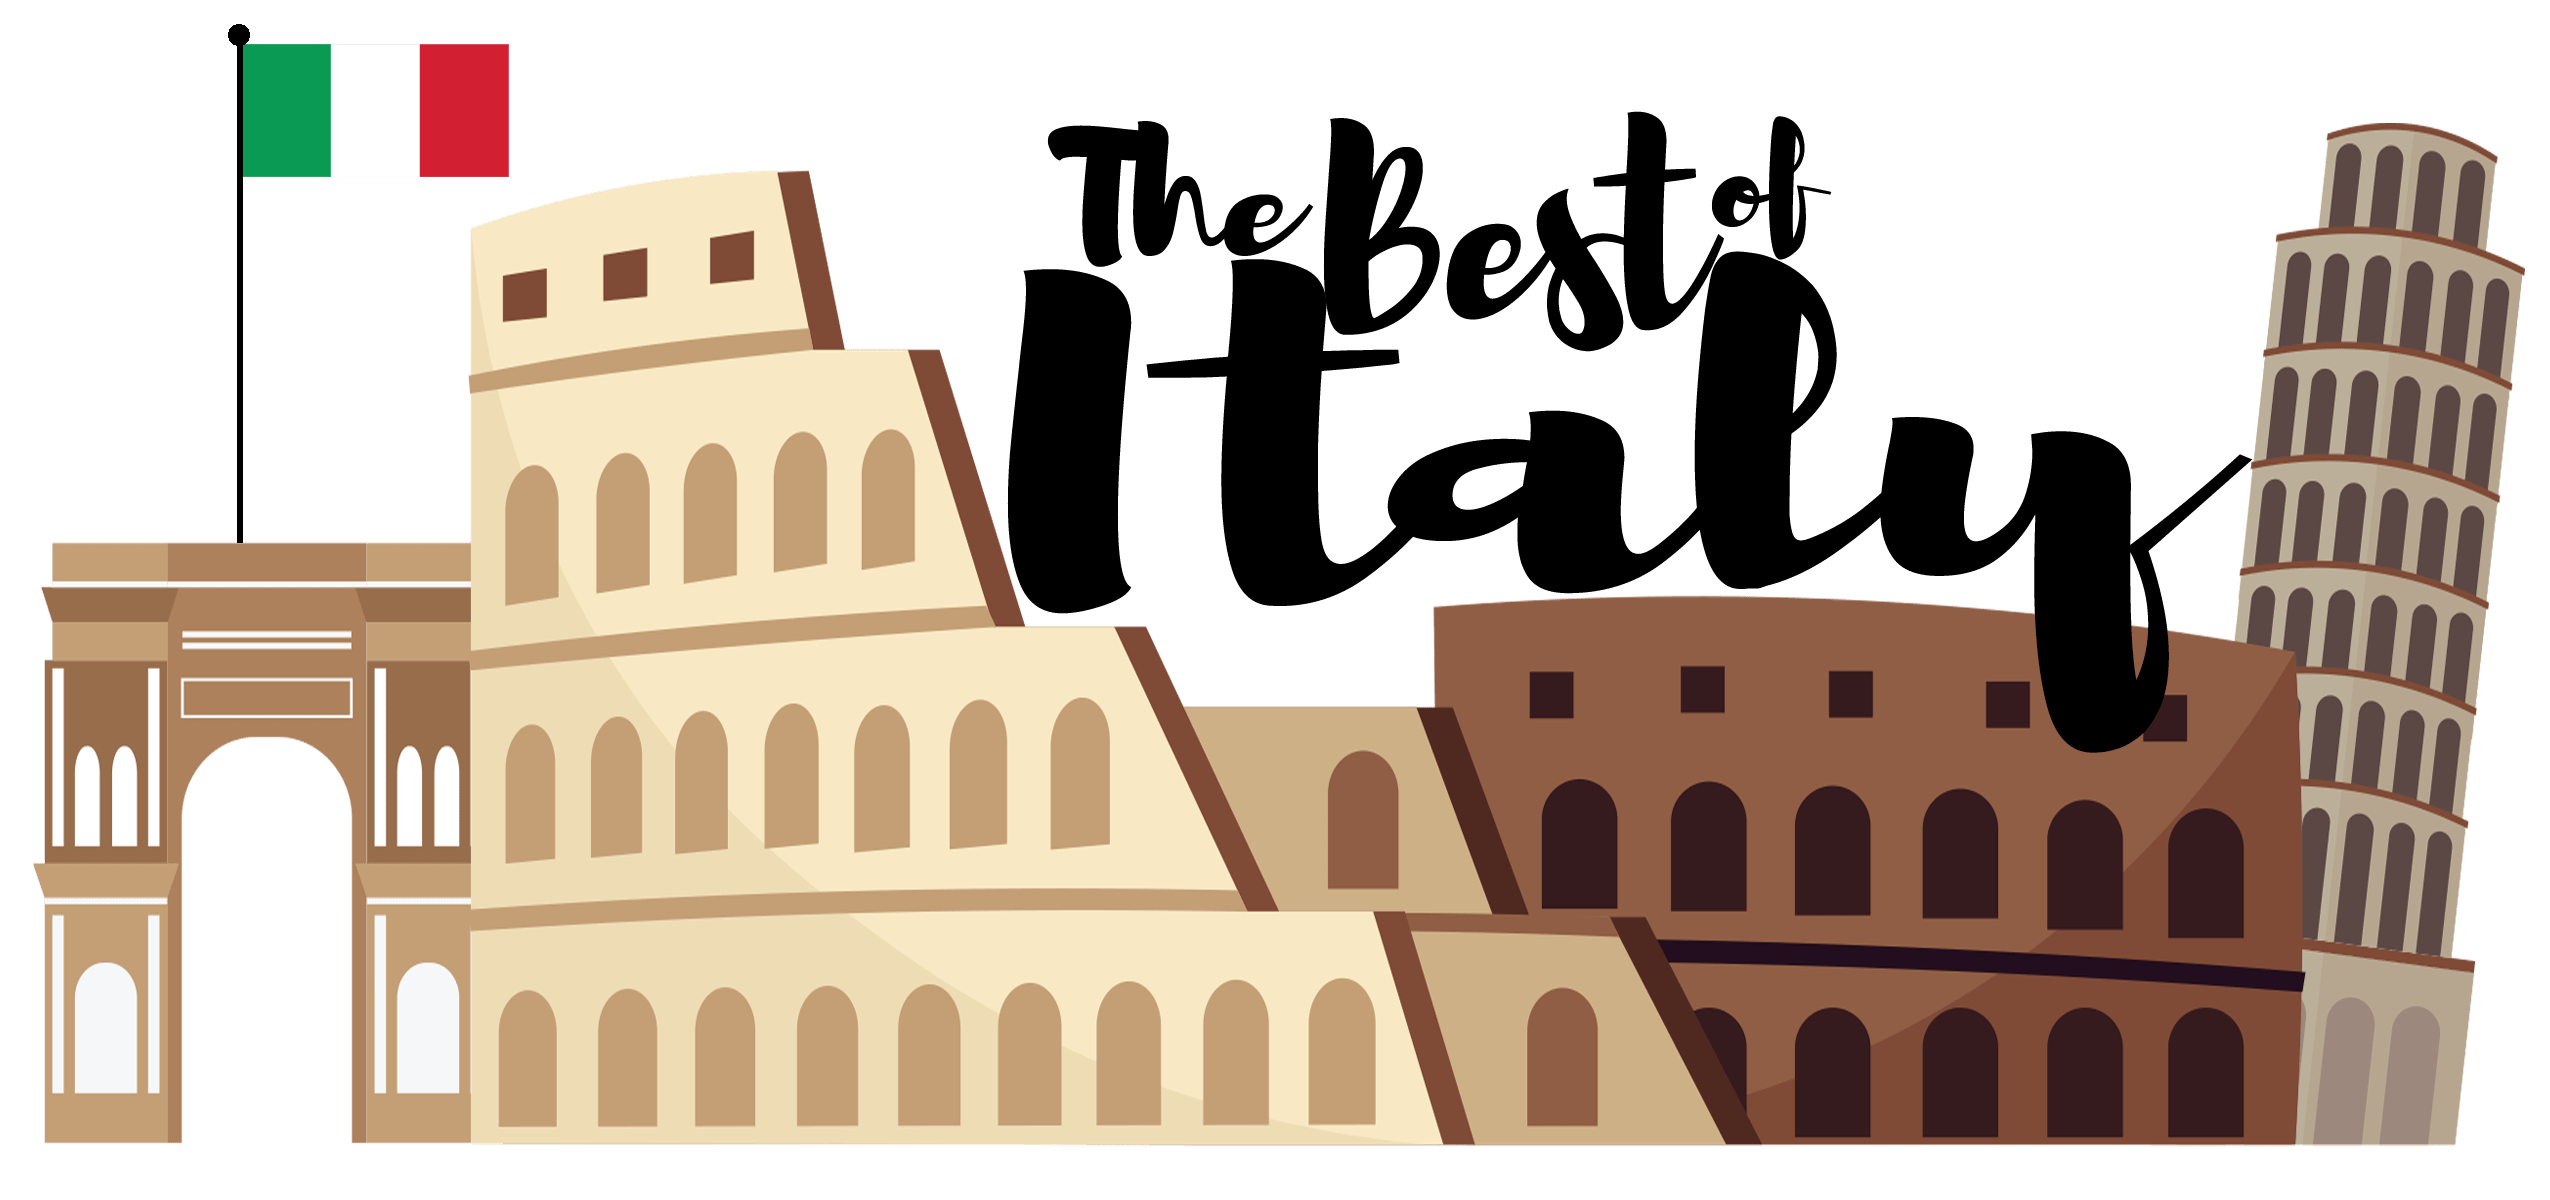 Italy PNG Image File